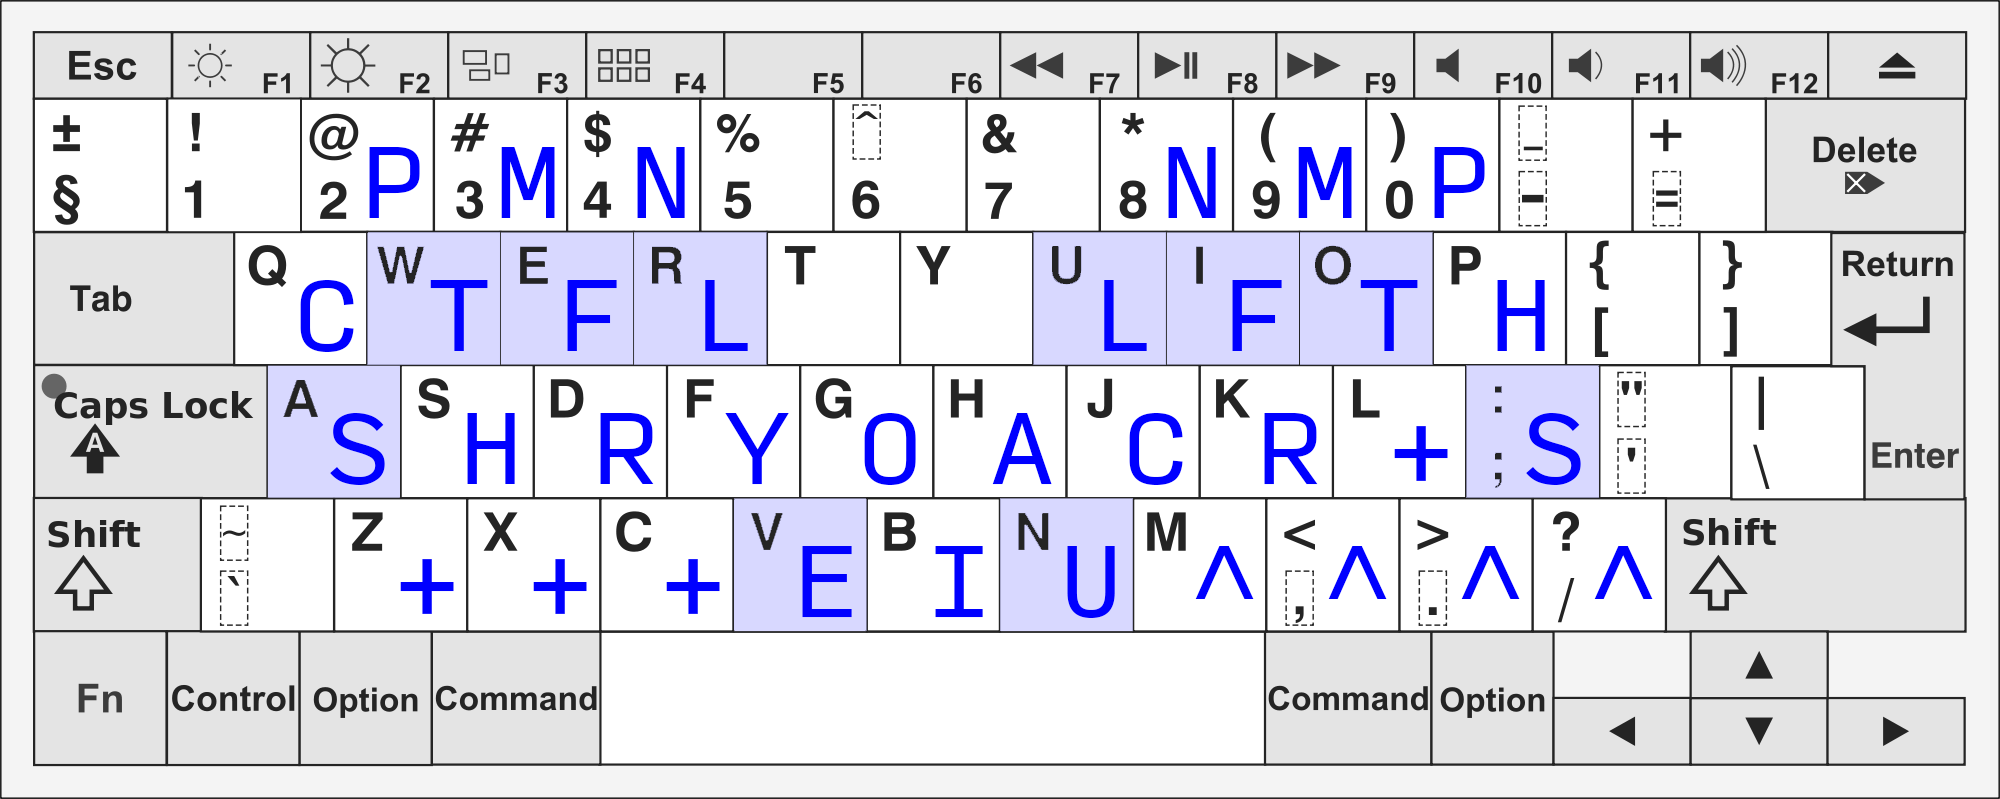 In the QWERTY to palan mapping, S is a, C is q, P is 2, T is w, H is s, cross is z, x, and c, N is 4, L is r, Y is f, O is g, E is v, A is h, U is n, I is b, point is m, comma, period, and slash, L is u, C is j, N is 8, F is i, R is k, M is 9, T is o, the right cross is l, P is 0, S is semicolon, and H is p.